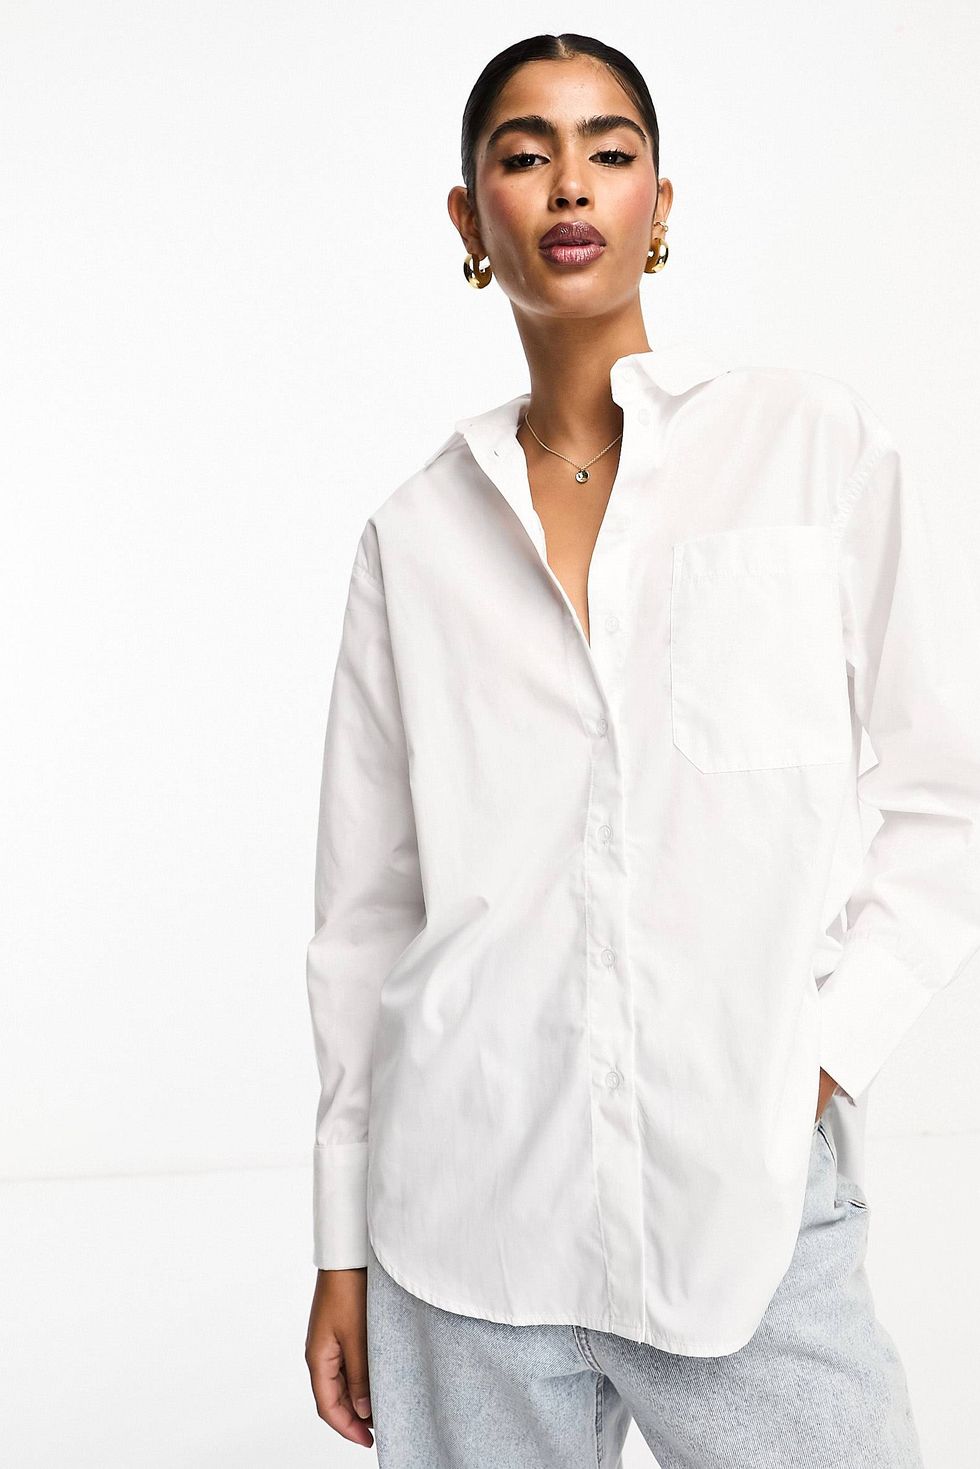 What To Wear With A White Button-Down Shirt - 16 Fresh Outfit Ideas